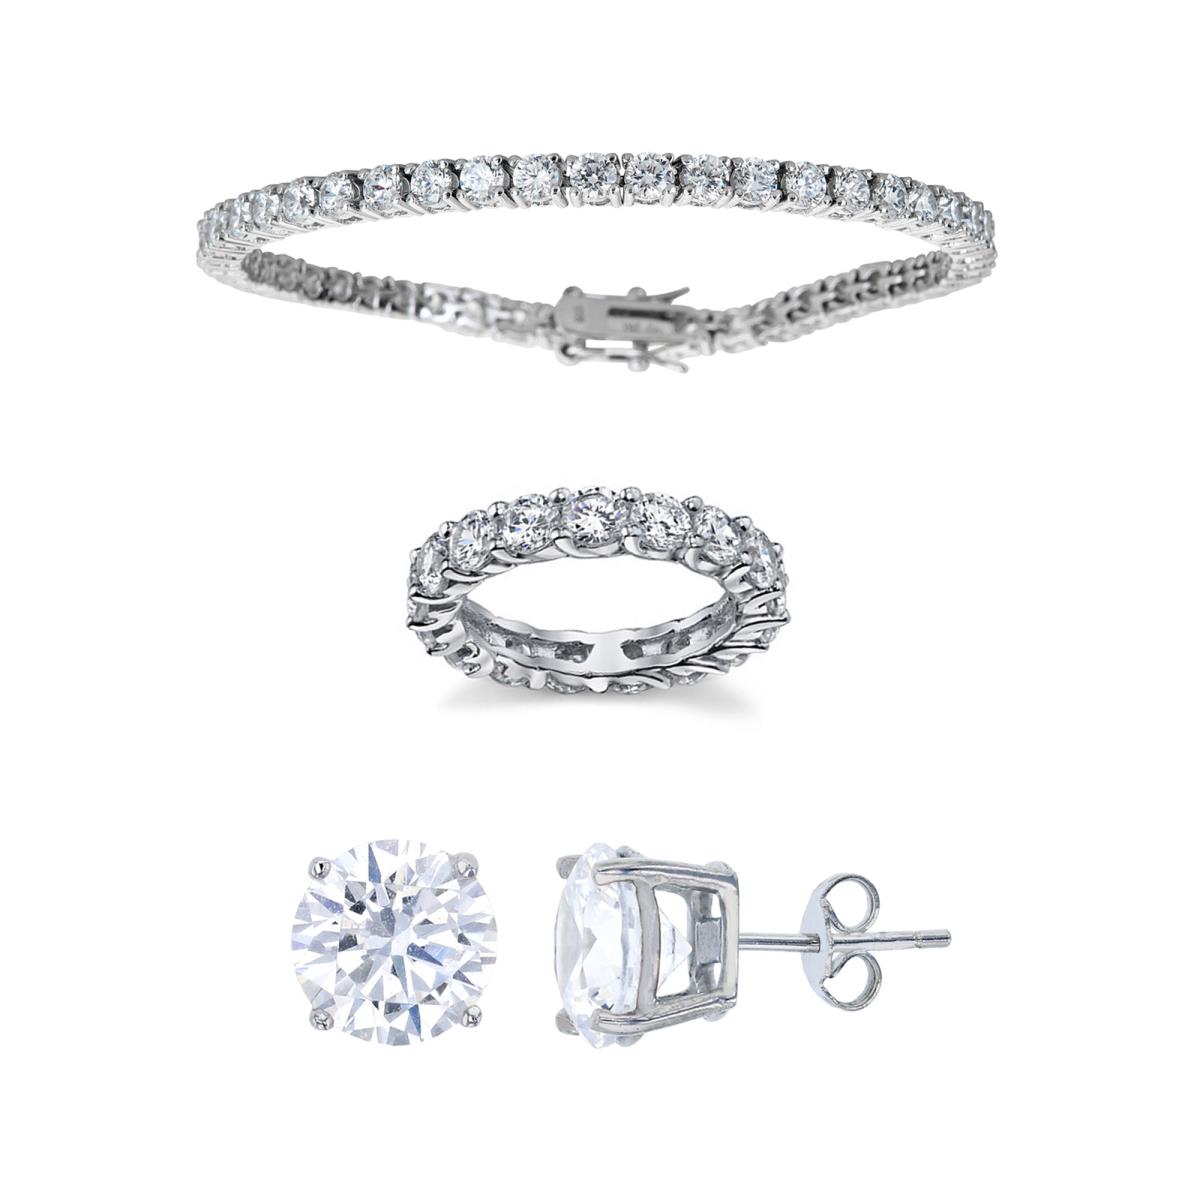 Sterling Silver Rhodium 4mm Rd Cut Eternity Band, 3.5mm Rd Prong Set Tennis Bracelet & 8mm Solitaire Stud Earring Set